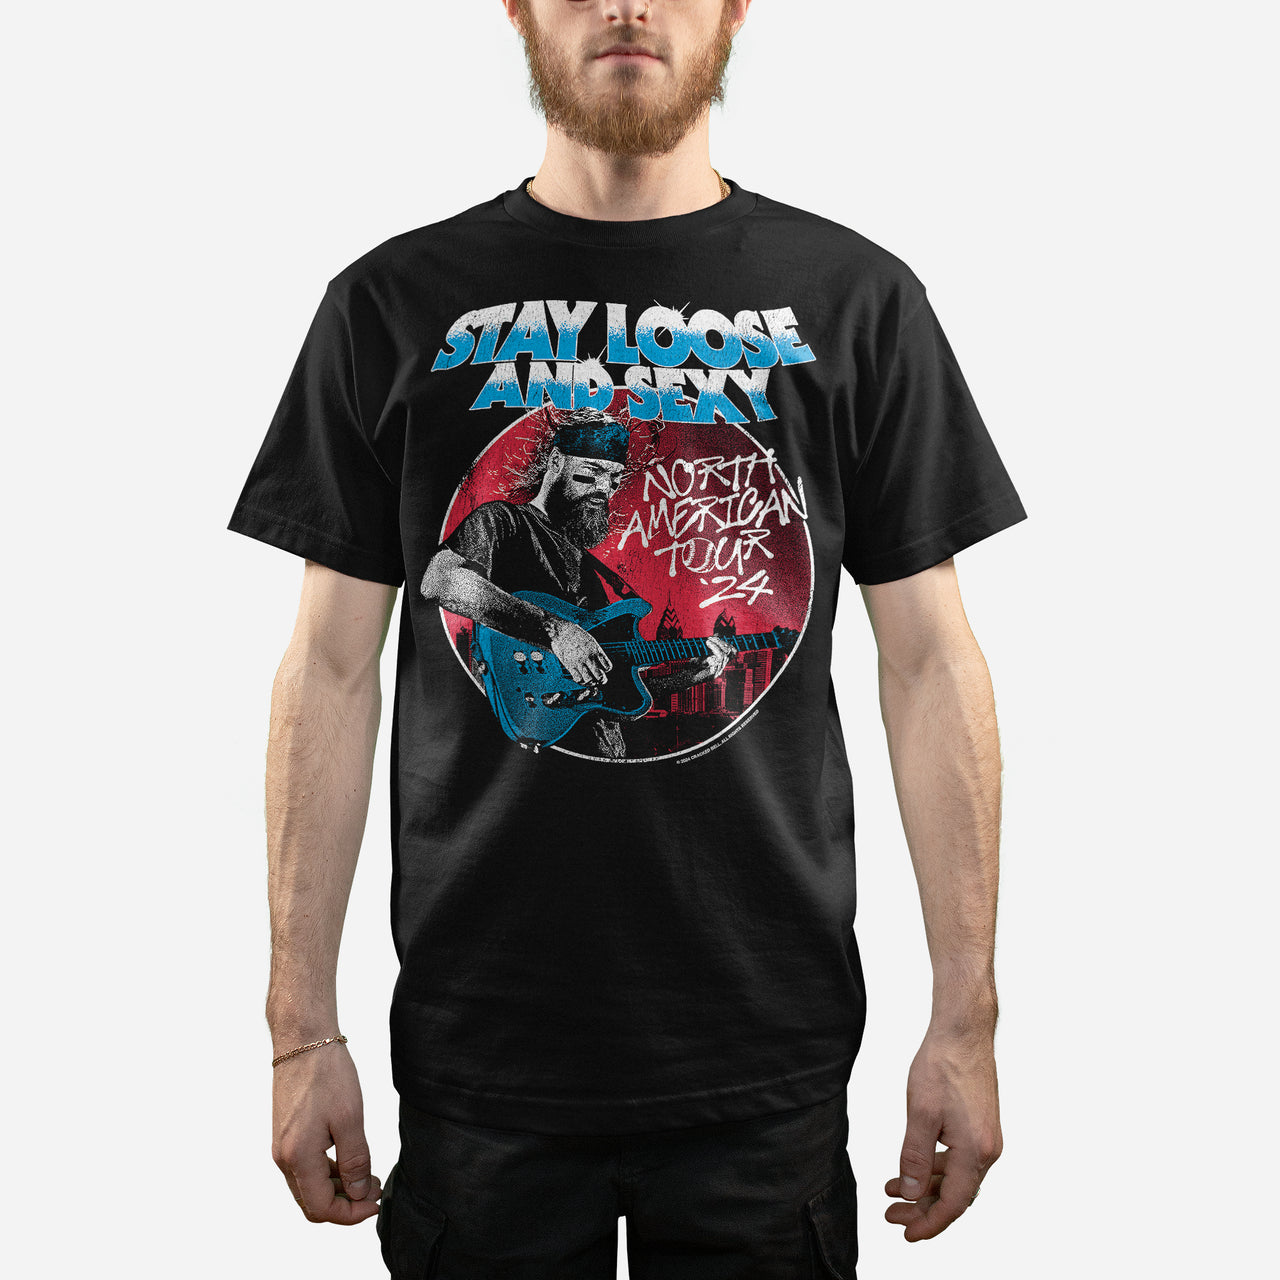 "Stay Loose" Shirt